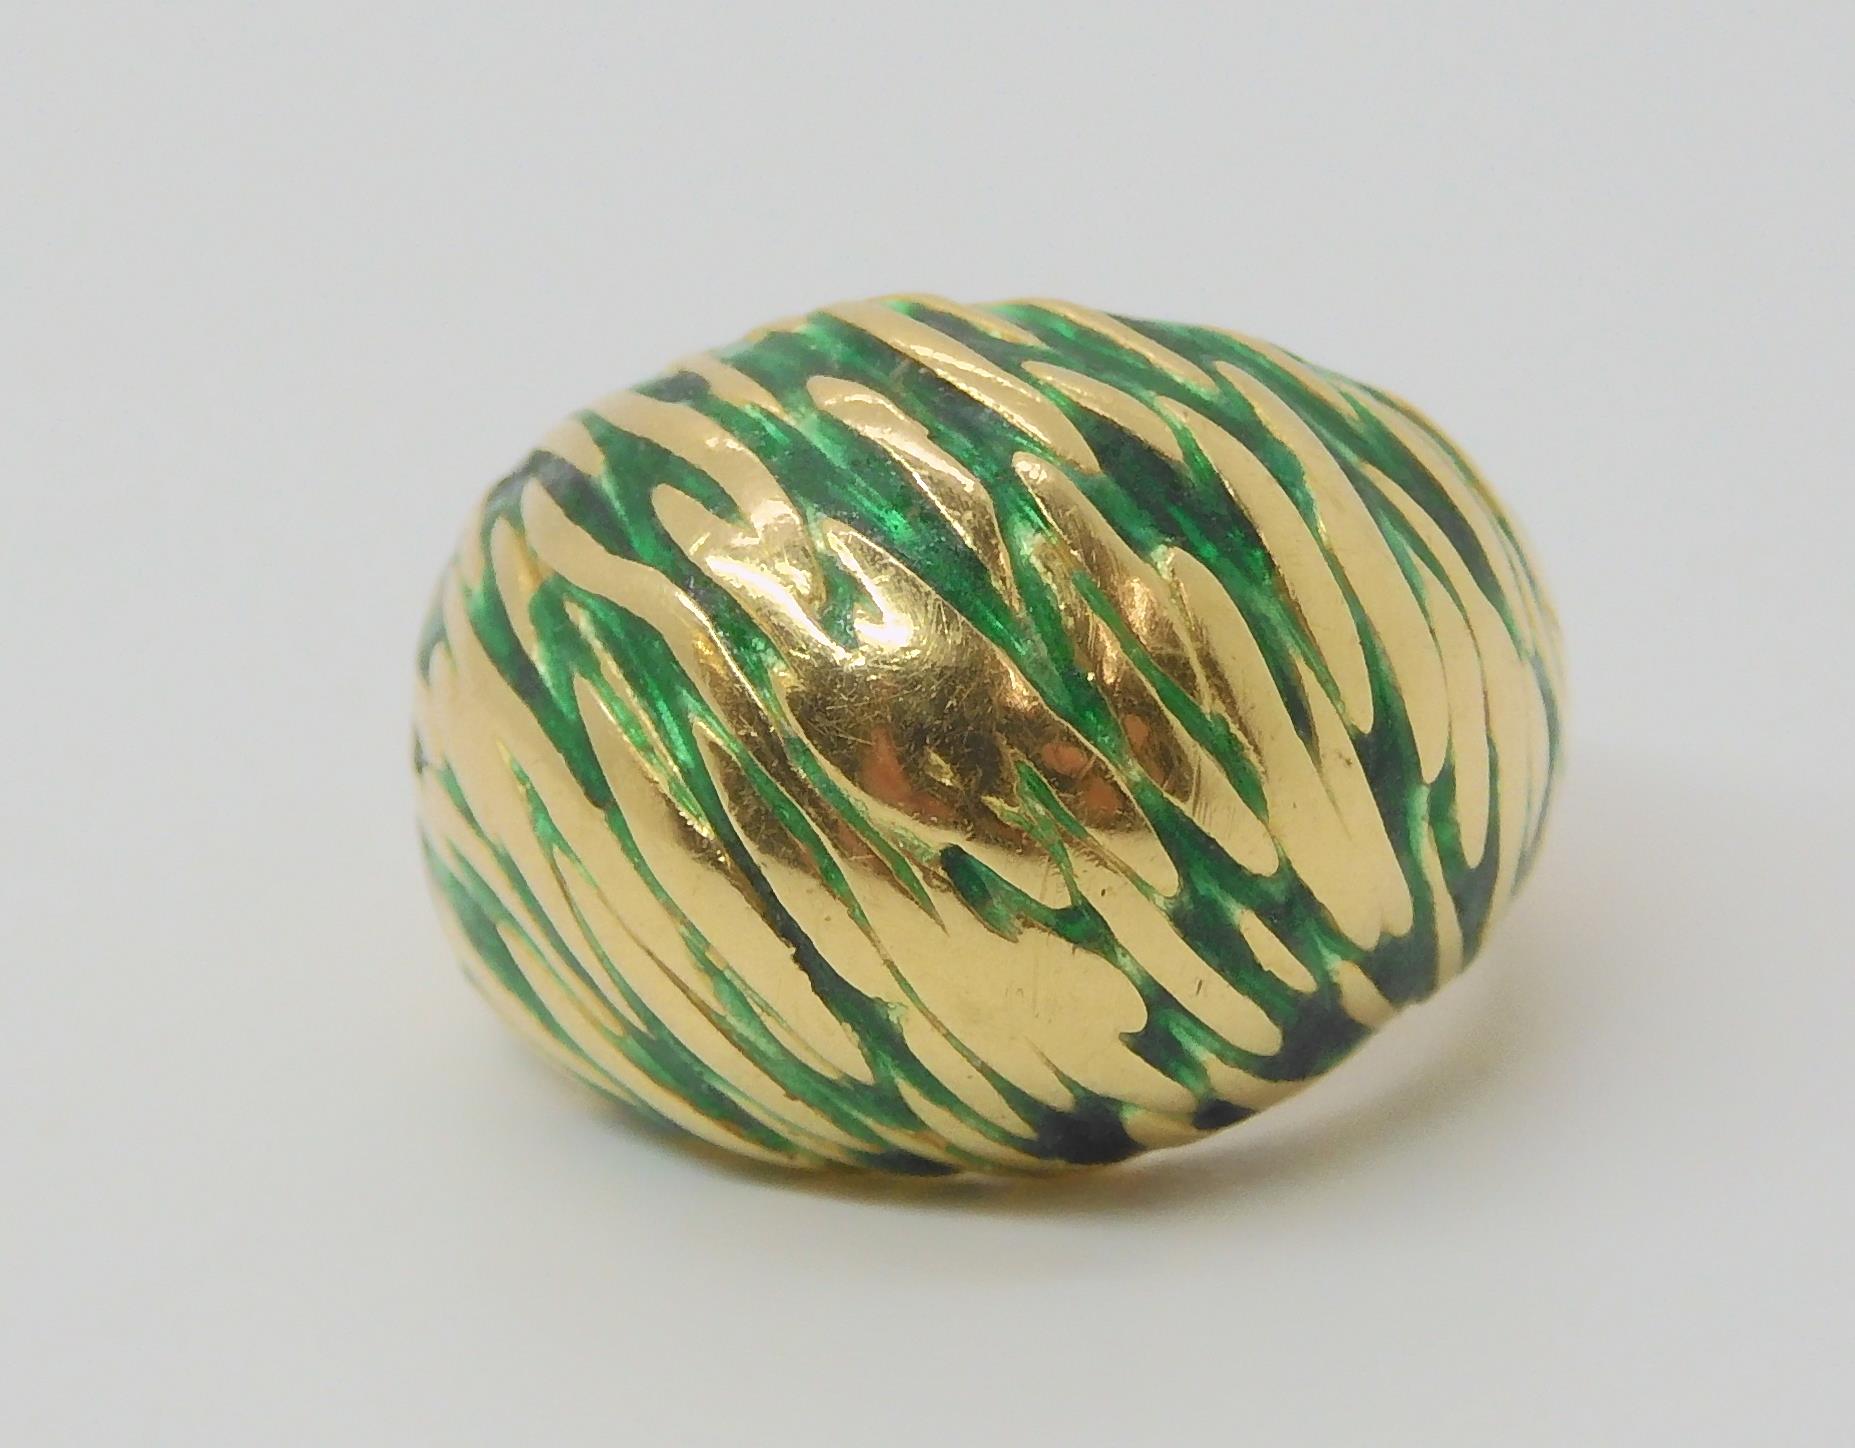 A KUTCHINSKY ENAMEL RING the 18ct yellow gold high domed ring is enamelled in green to the